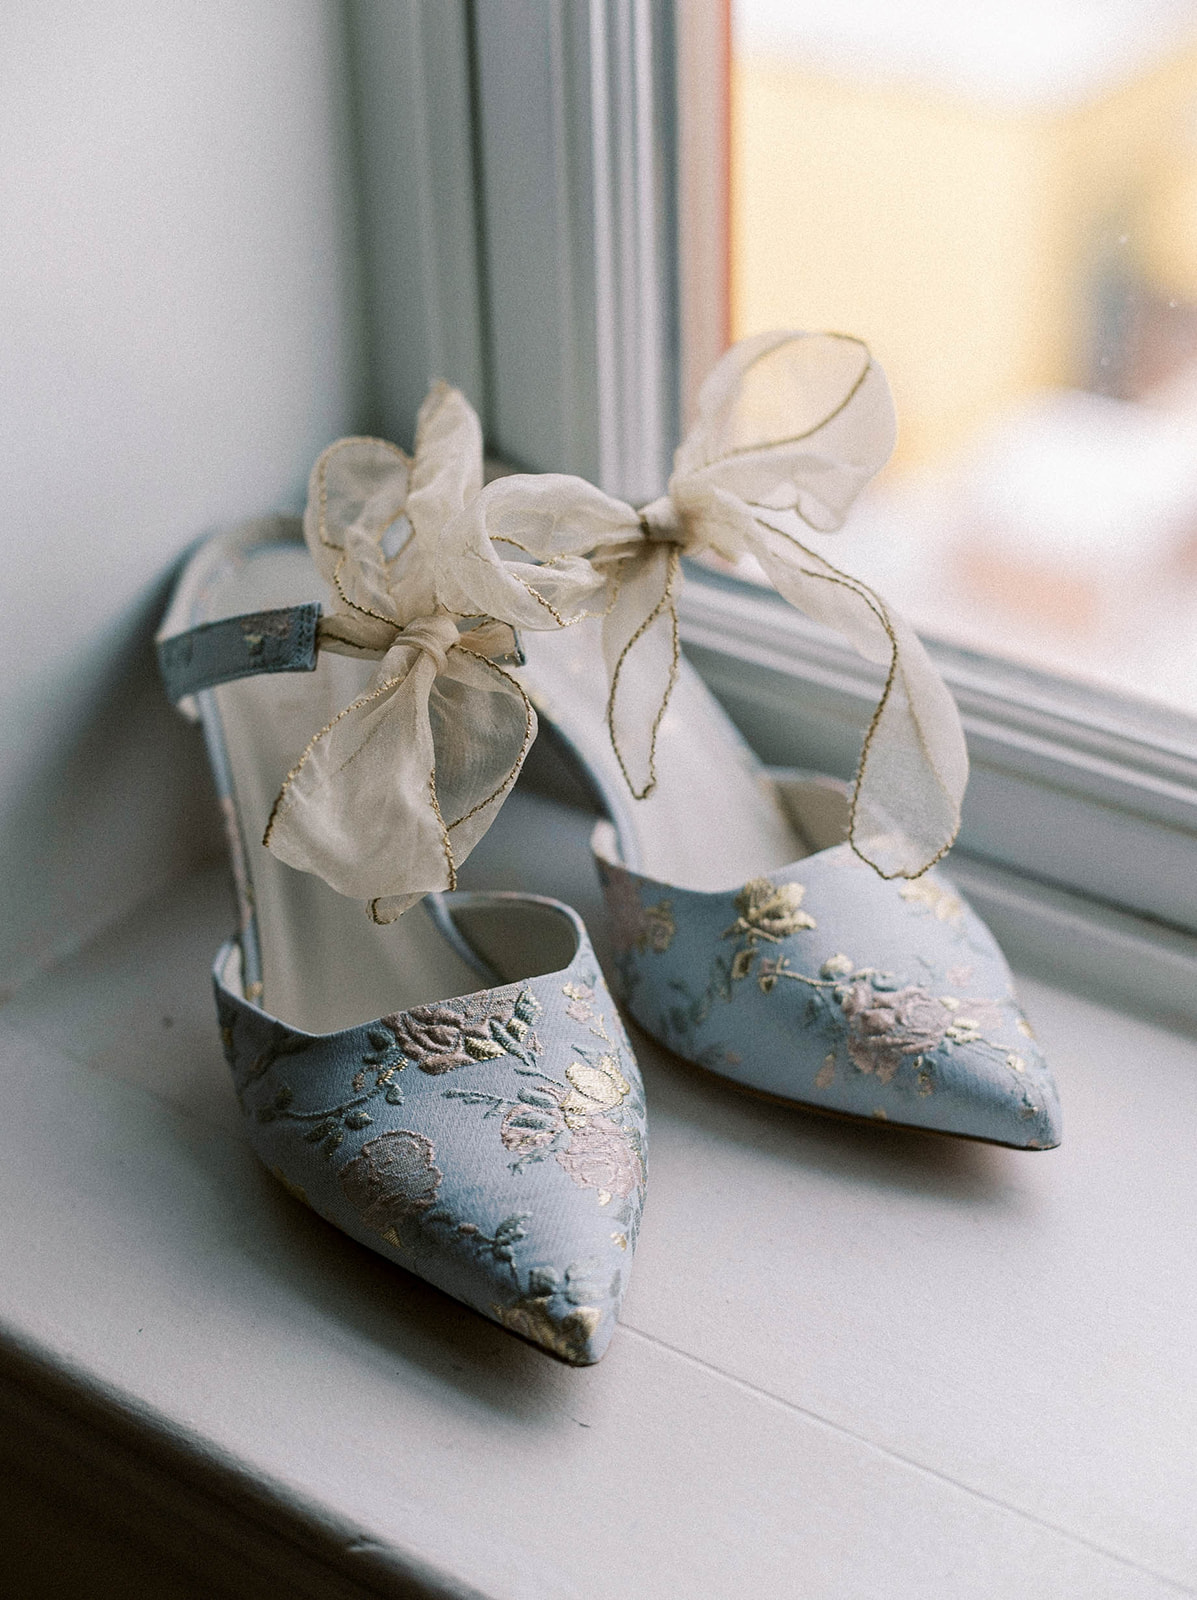 BLUE WEDDING SHOES SITTING AT A WINDOW